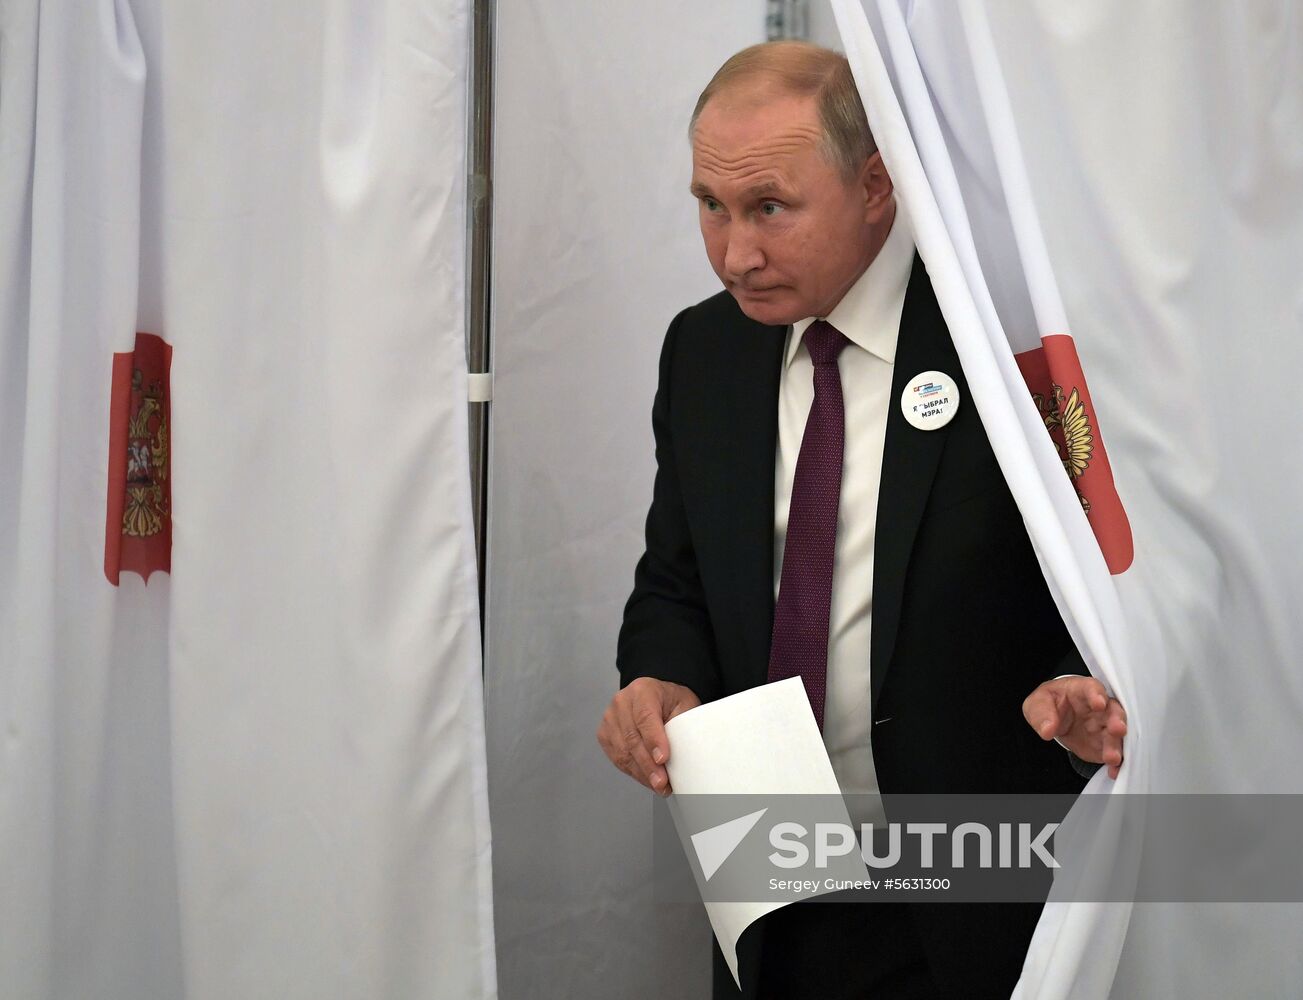 Russian President Vladimir Putin casts vote in Moscow mayoral election